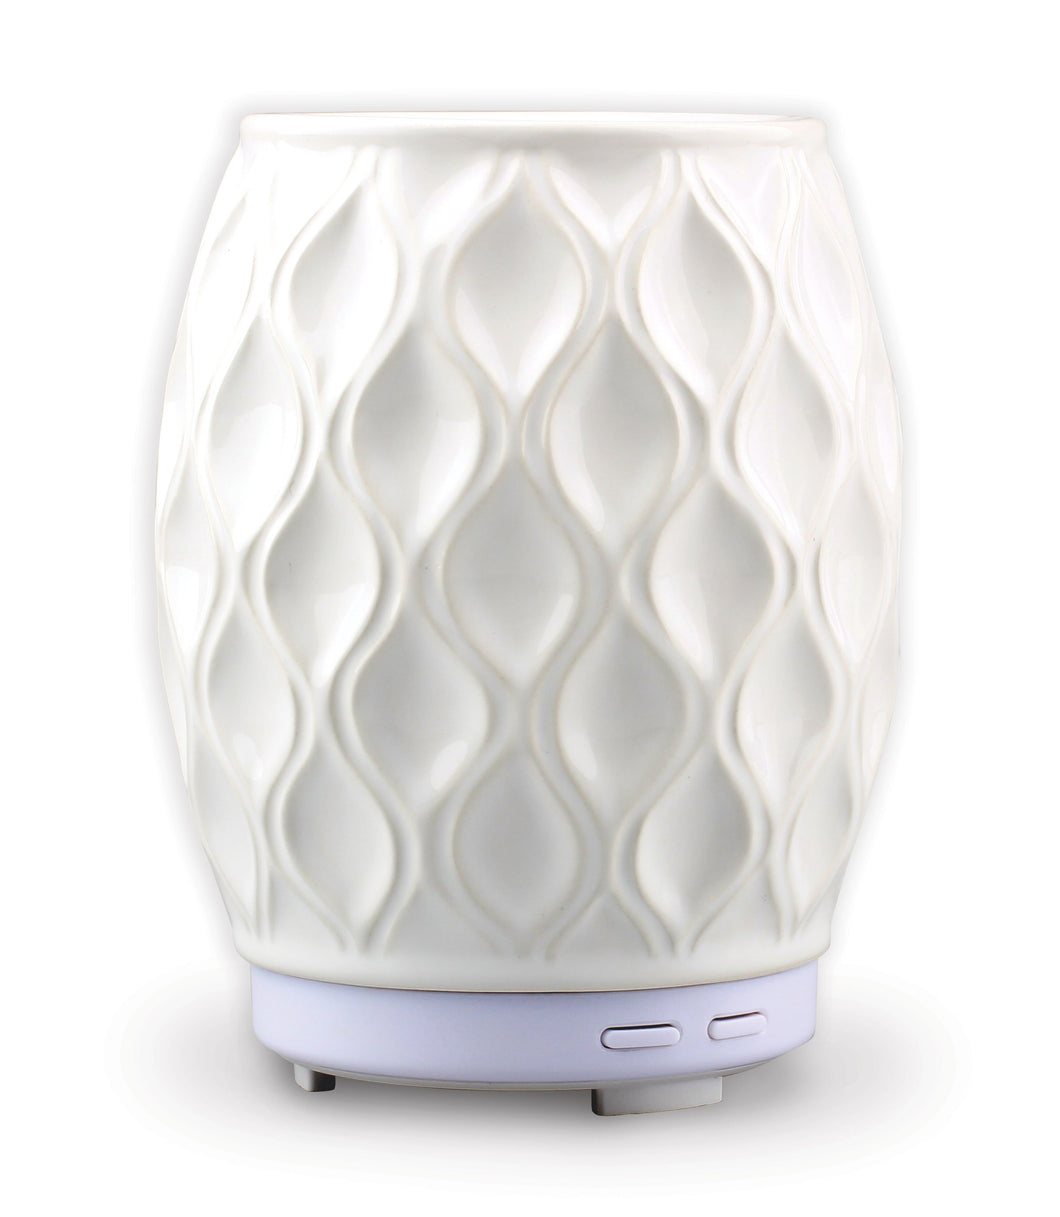 AromaHouse Aromavase Ultrasonic Ceramic Essential Oil Diffuser for Essential Oils and Fragrances Cool Mist Humidifier with Auto Shut-Off (White)